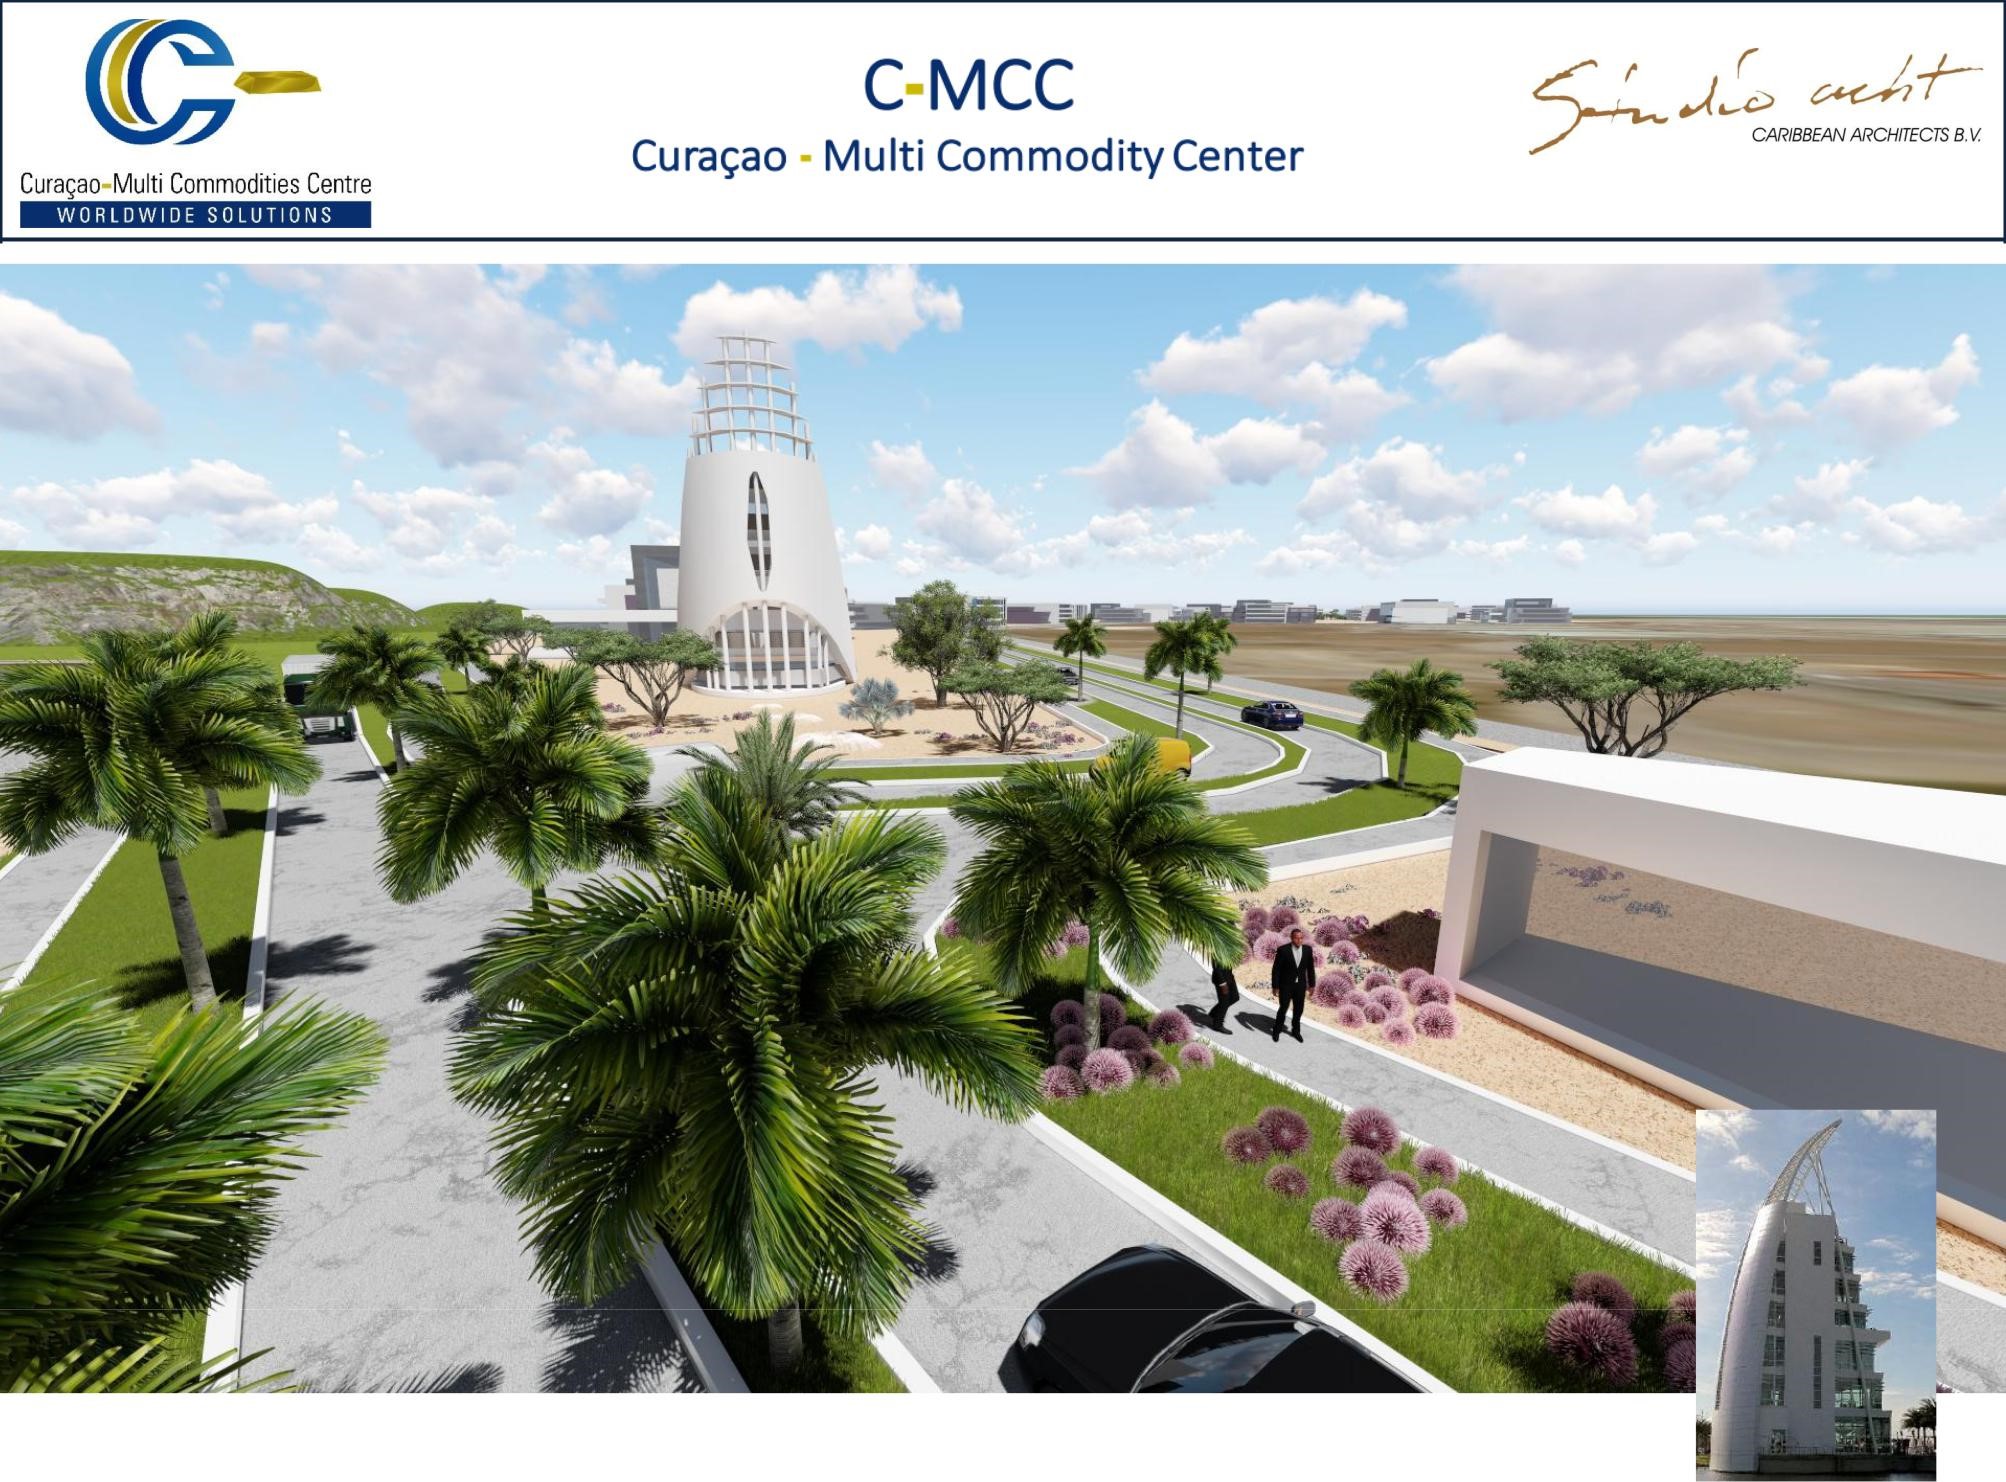 C-MCC Curacao Airport FTZ Site Elevations